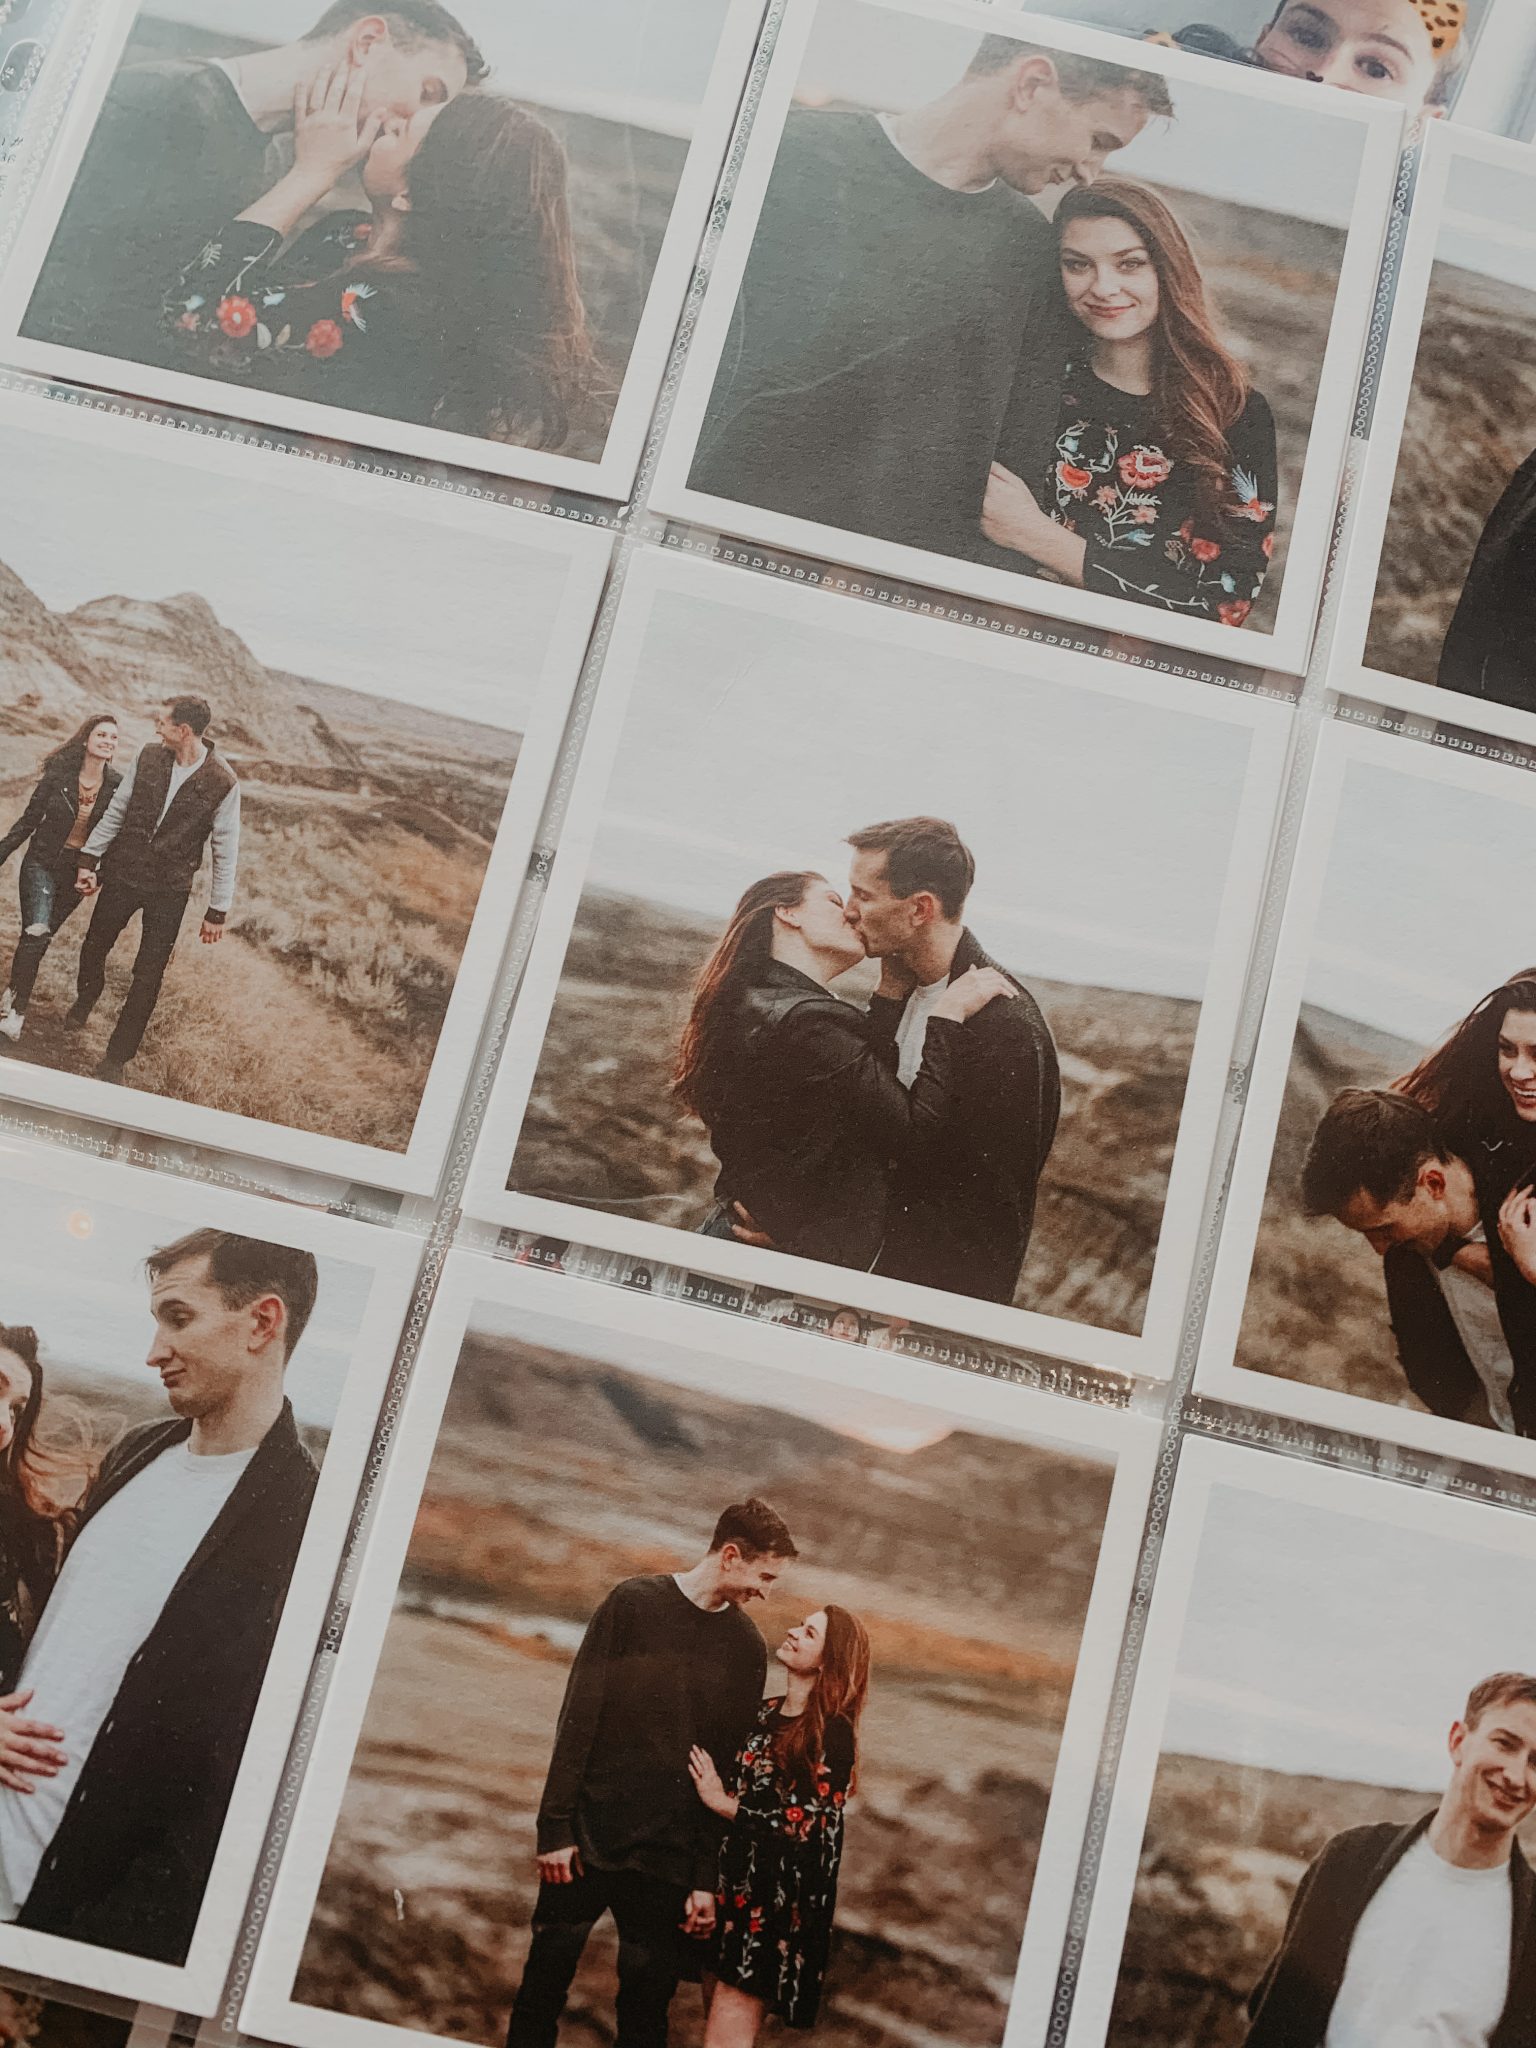 Gallery Wall DIY // Make Your Own Interactive Wedding Gallery!